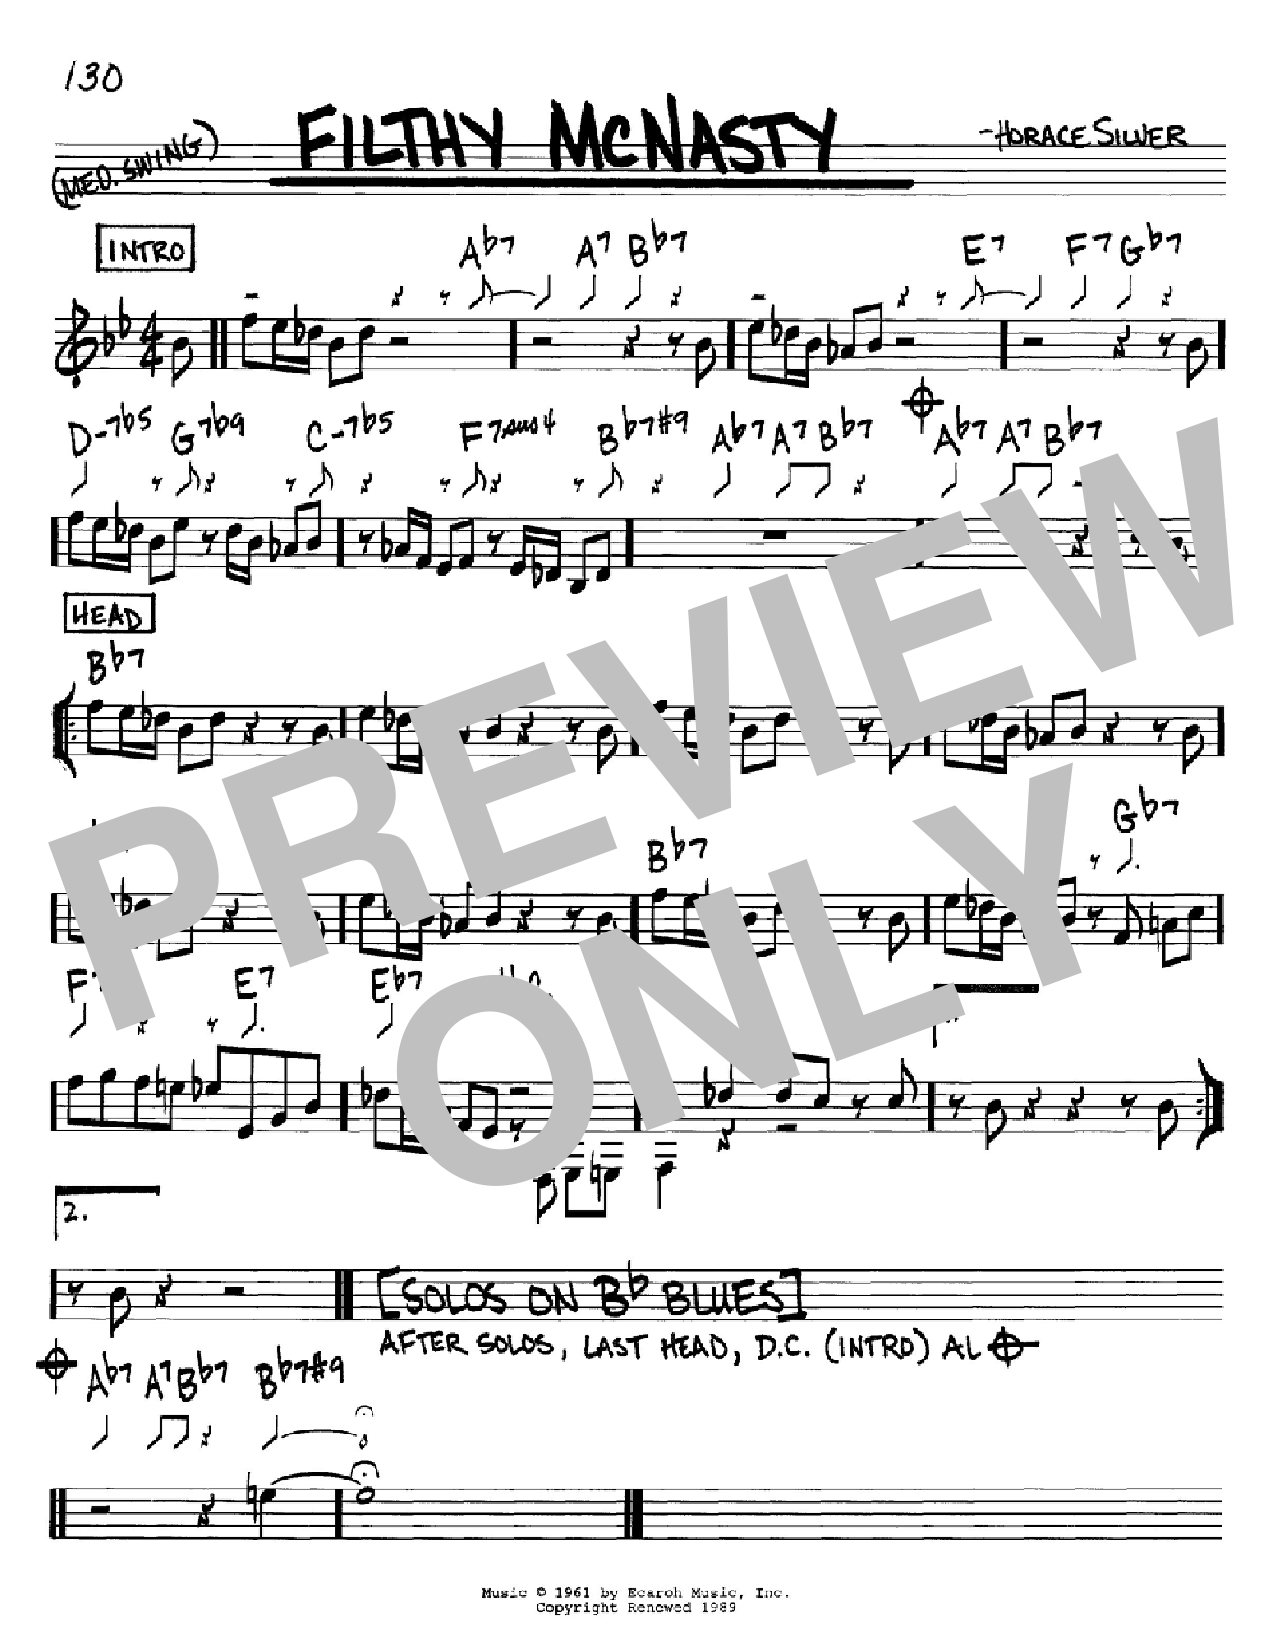 Download Horace Silver Filthy McNasty Sheet Music